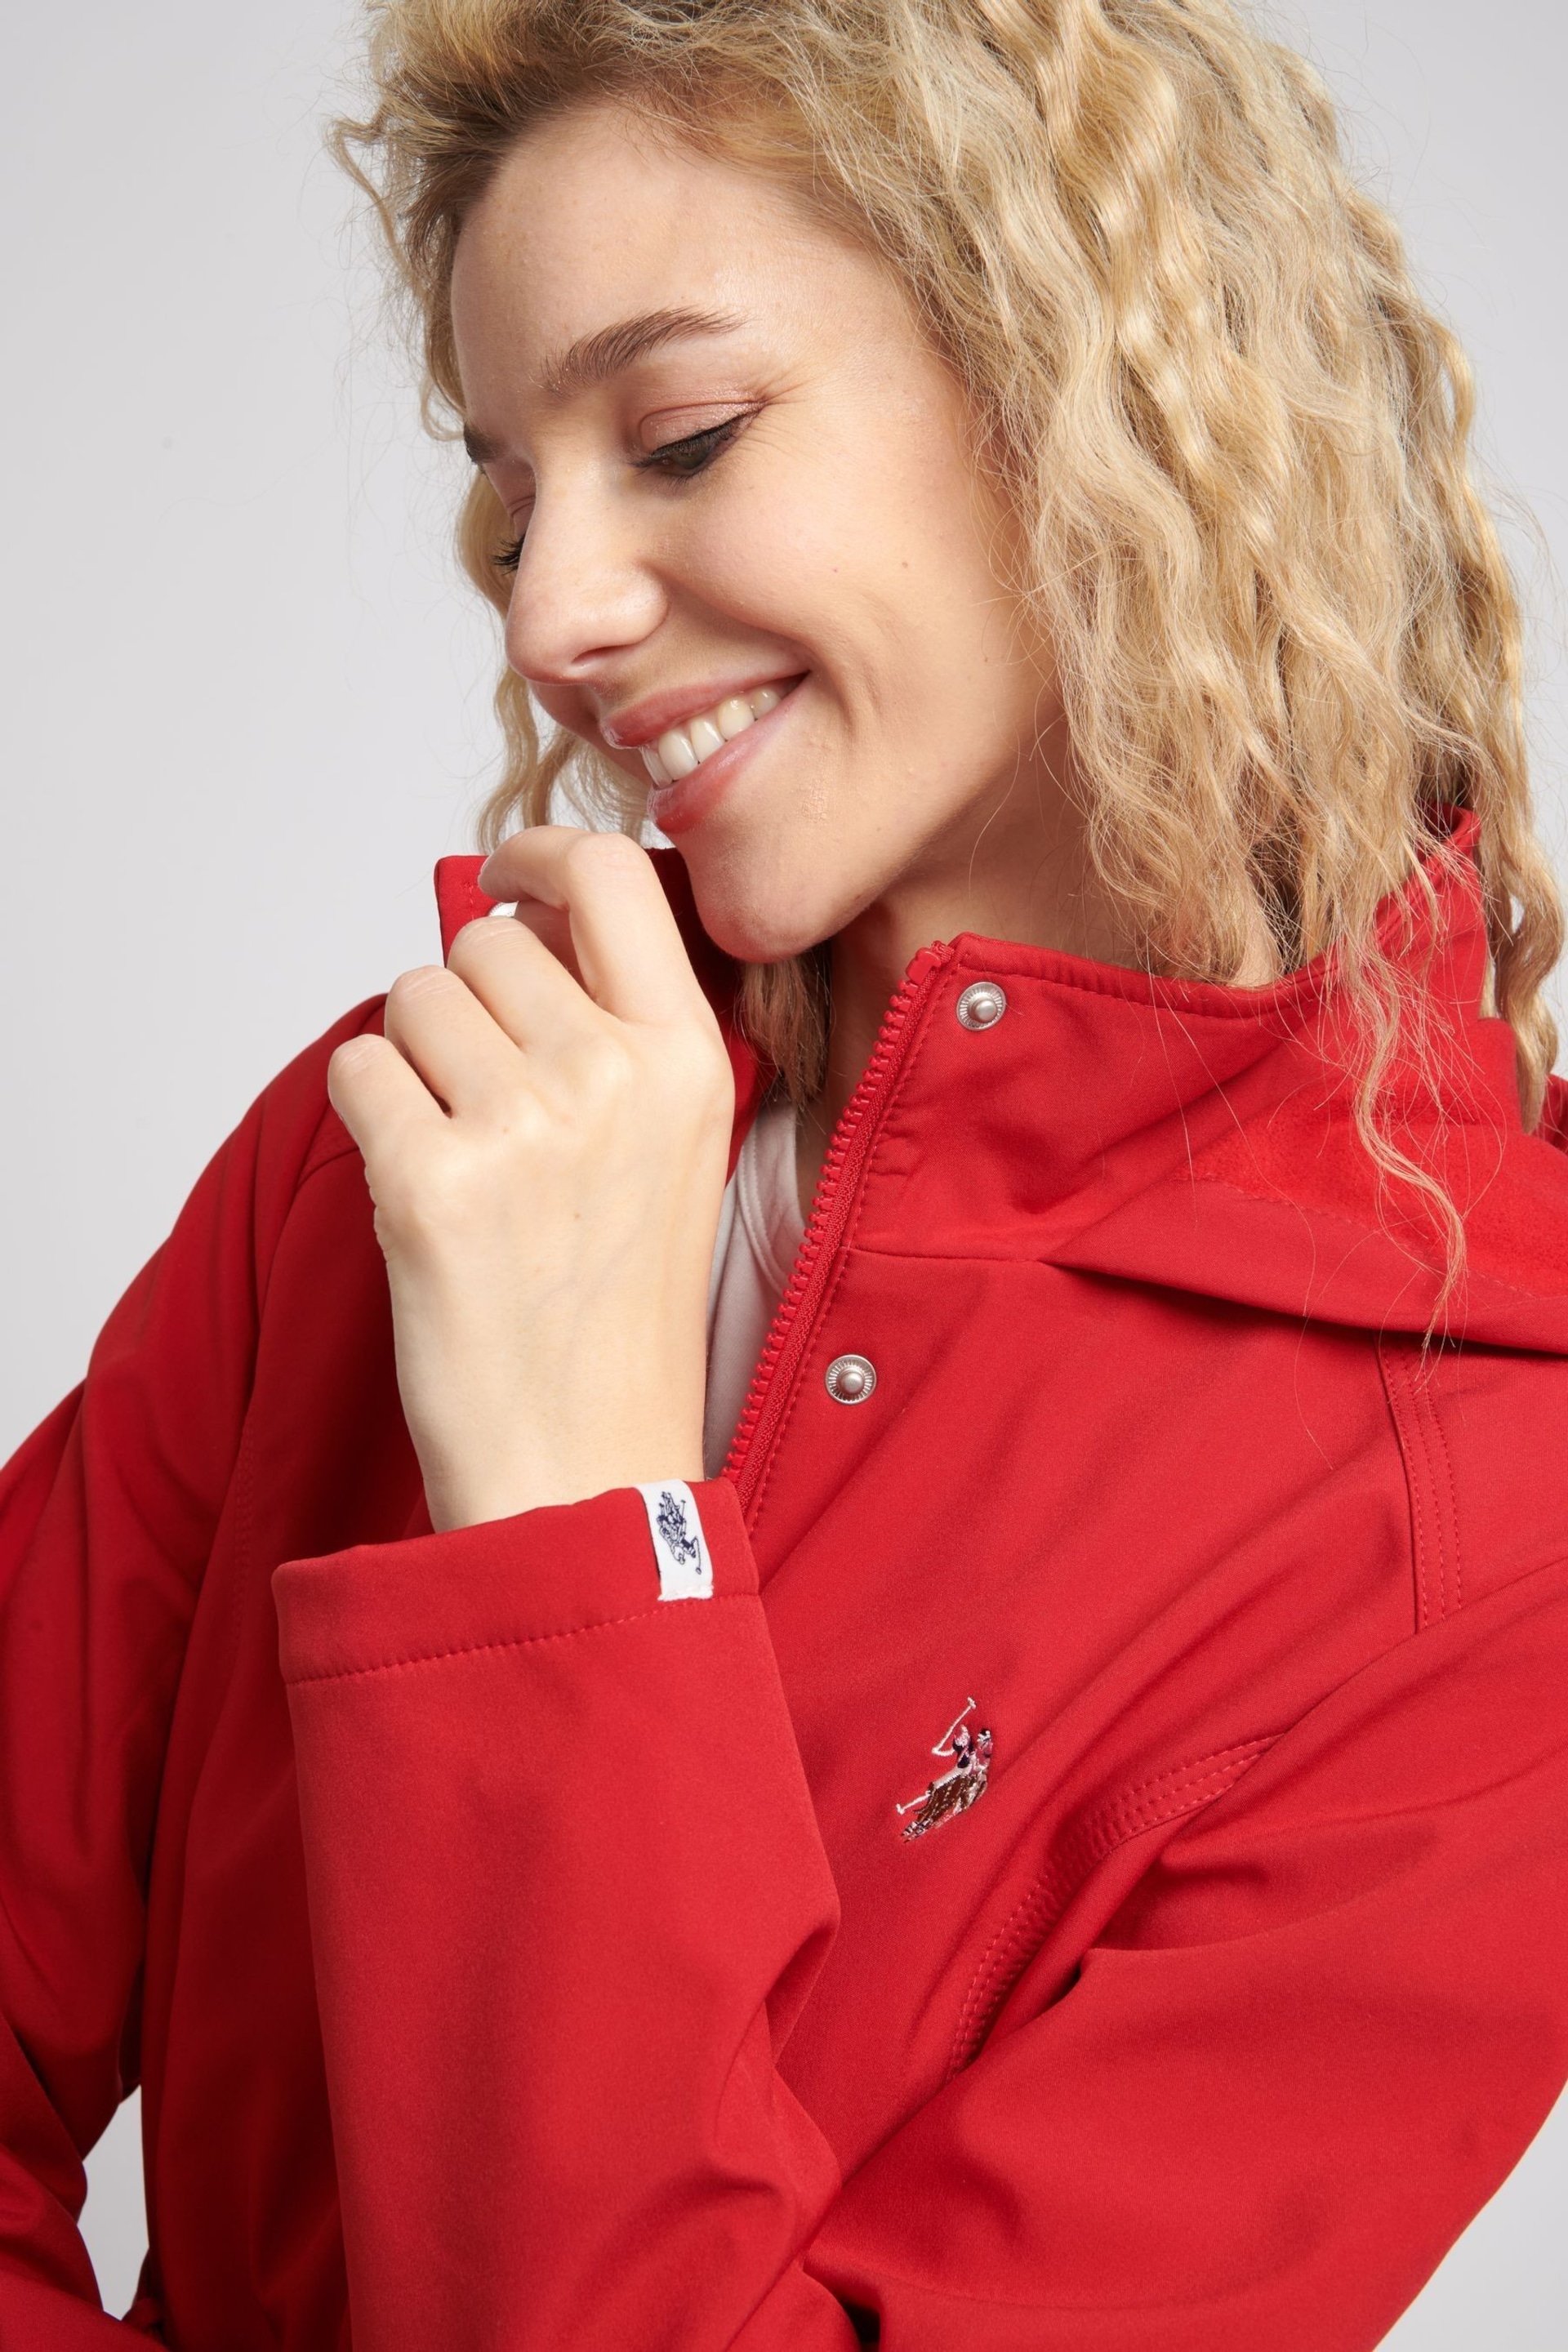 U.S. Polo Assn. Womens Red Belted Trench Coat - Image 3 of 4